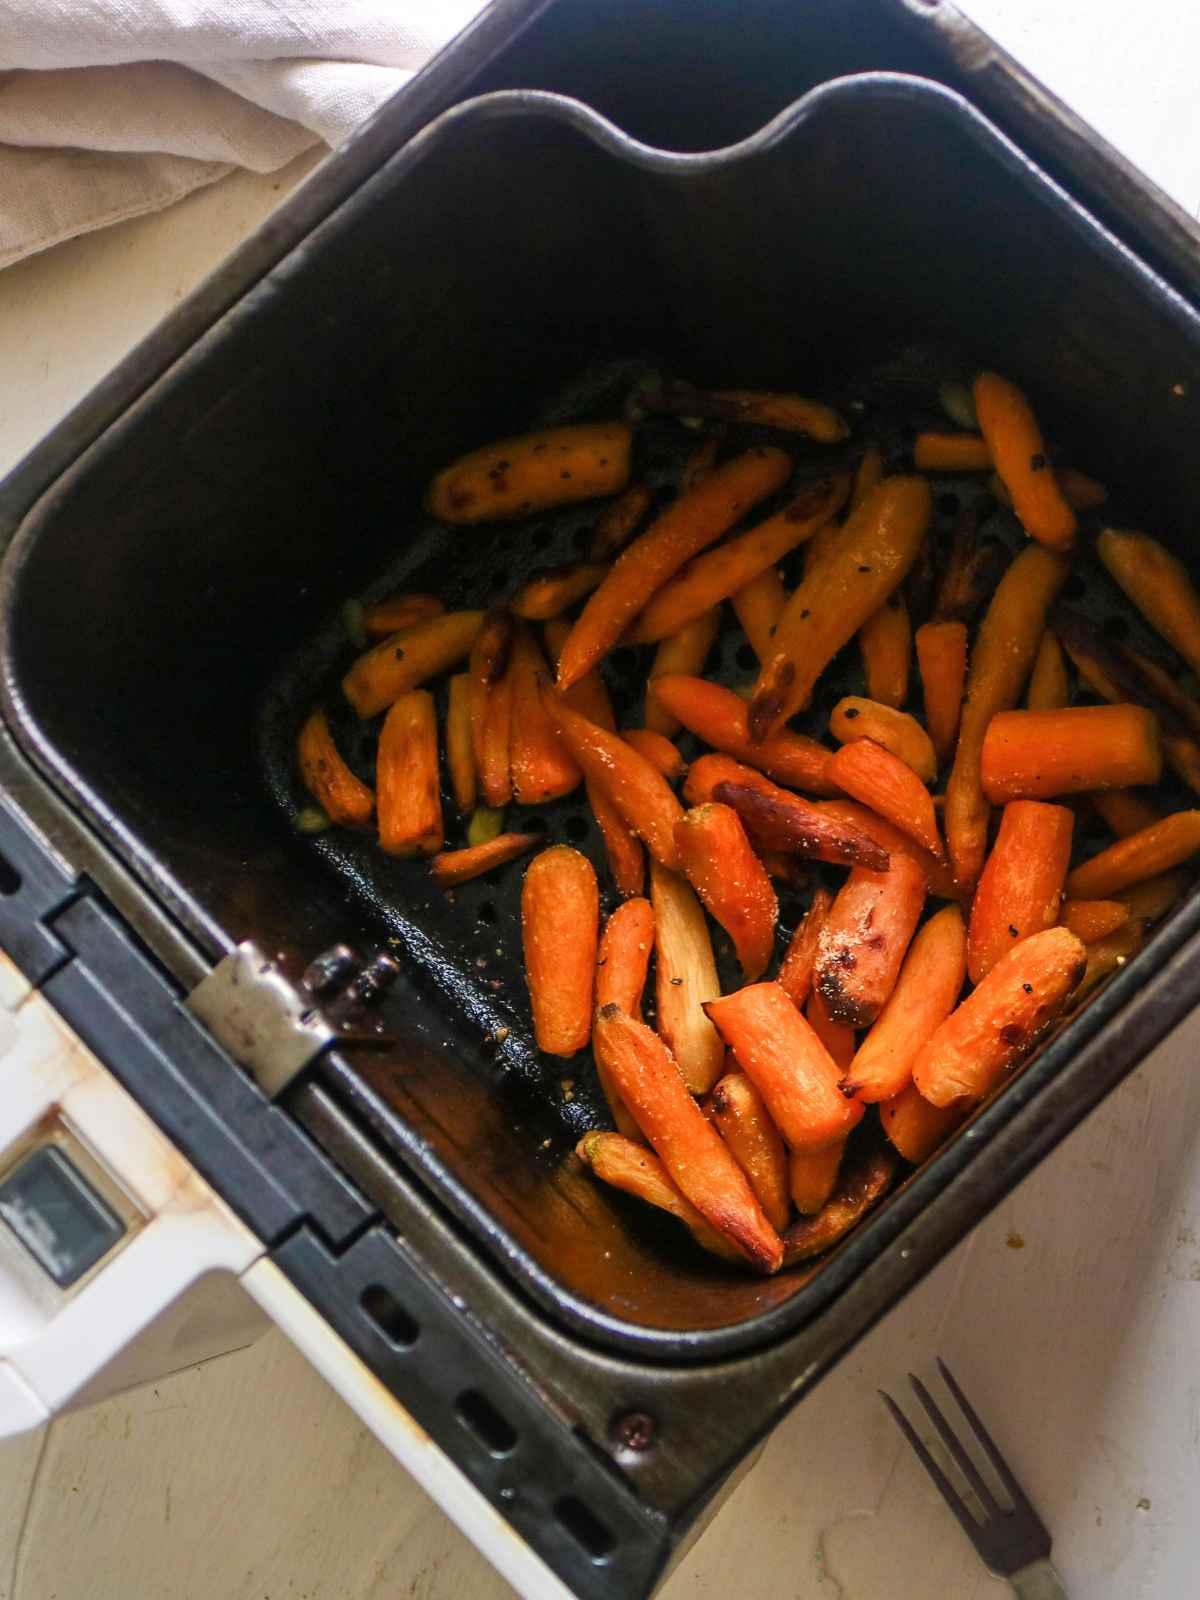 Baby carrots placed in air fryer basket.